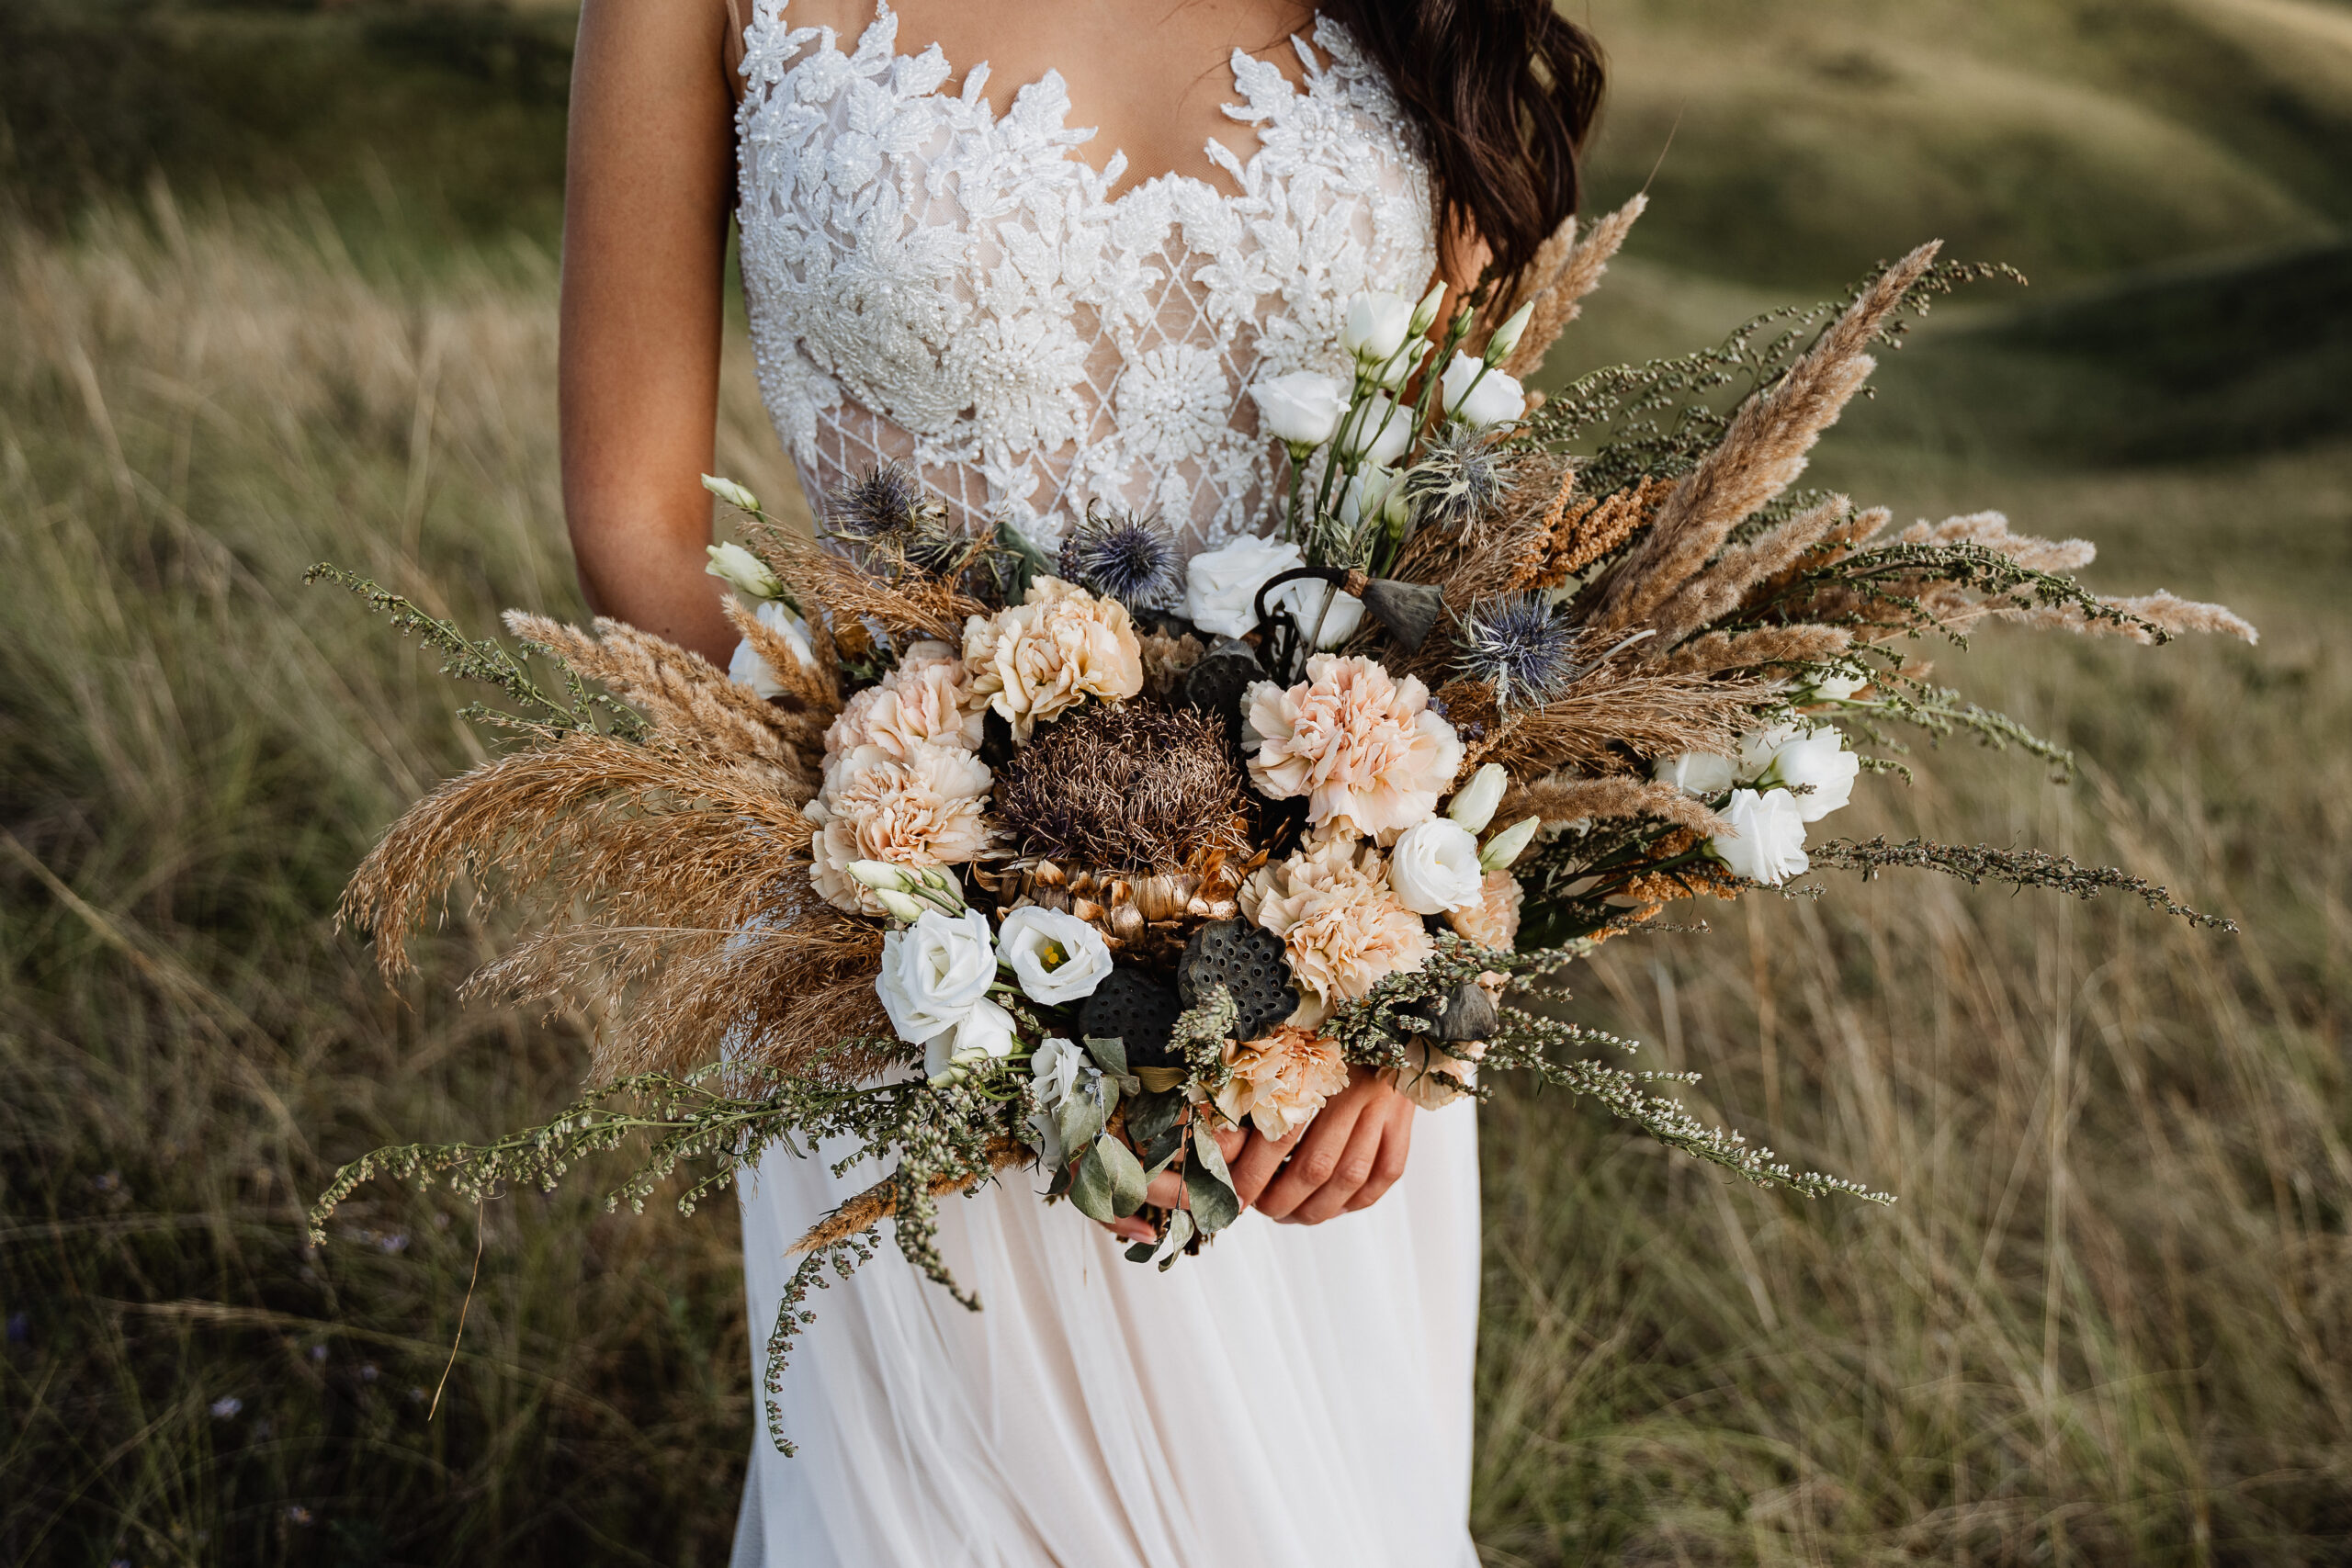 Wedding,Bouquet,Of,The,Bride,,Boho,Style,,Outdoor,,Dry,Flowers